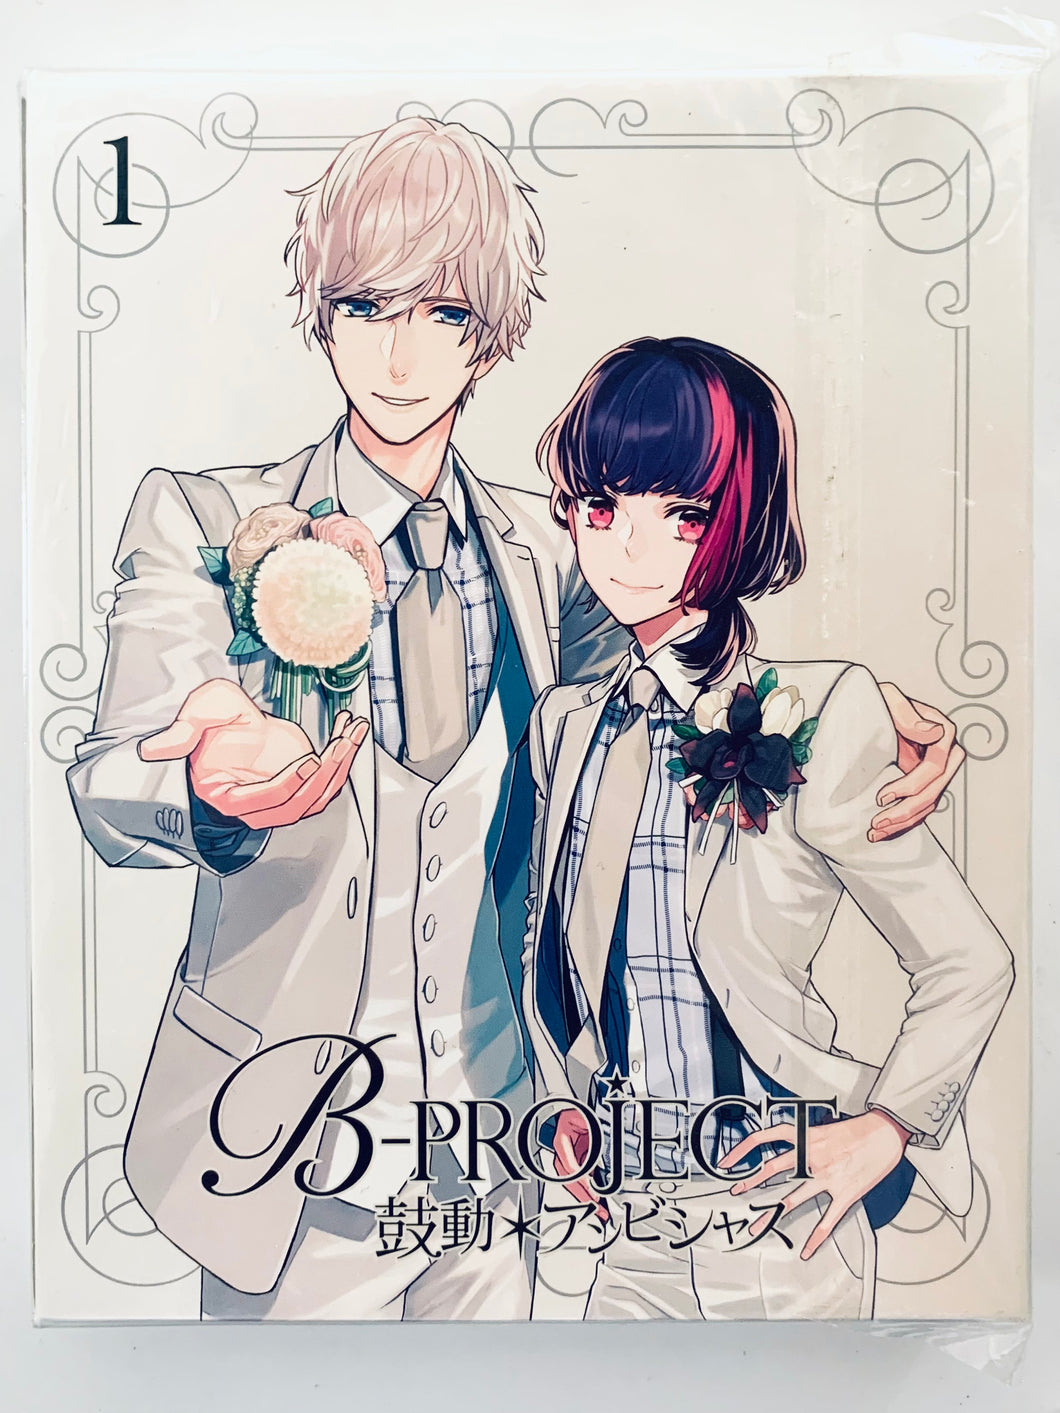 B-Project ~Kodou*Ambitious~ - DVD - 1 [Limited Edition]